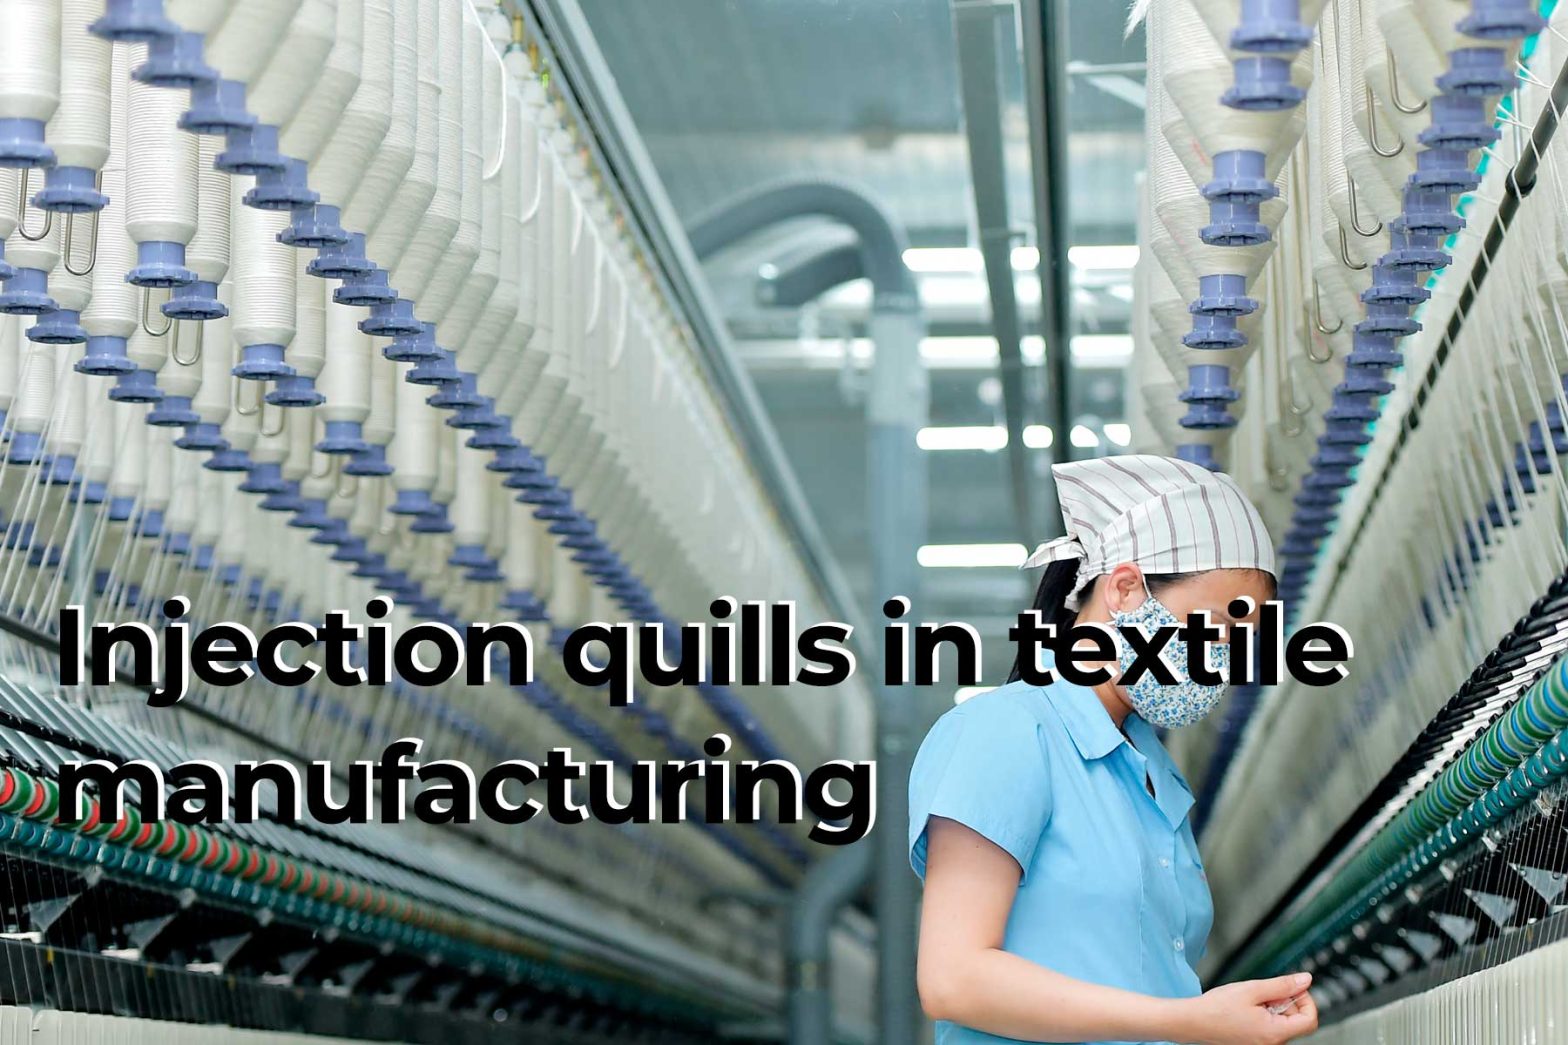 Advancements in technology and materials for injection quills in textile manufacturing